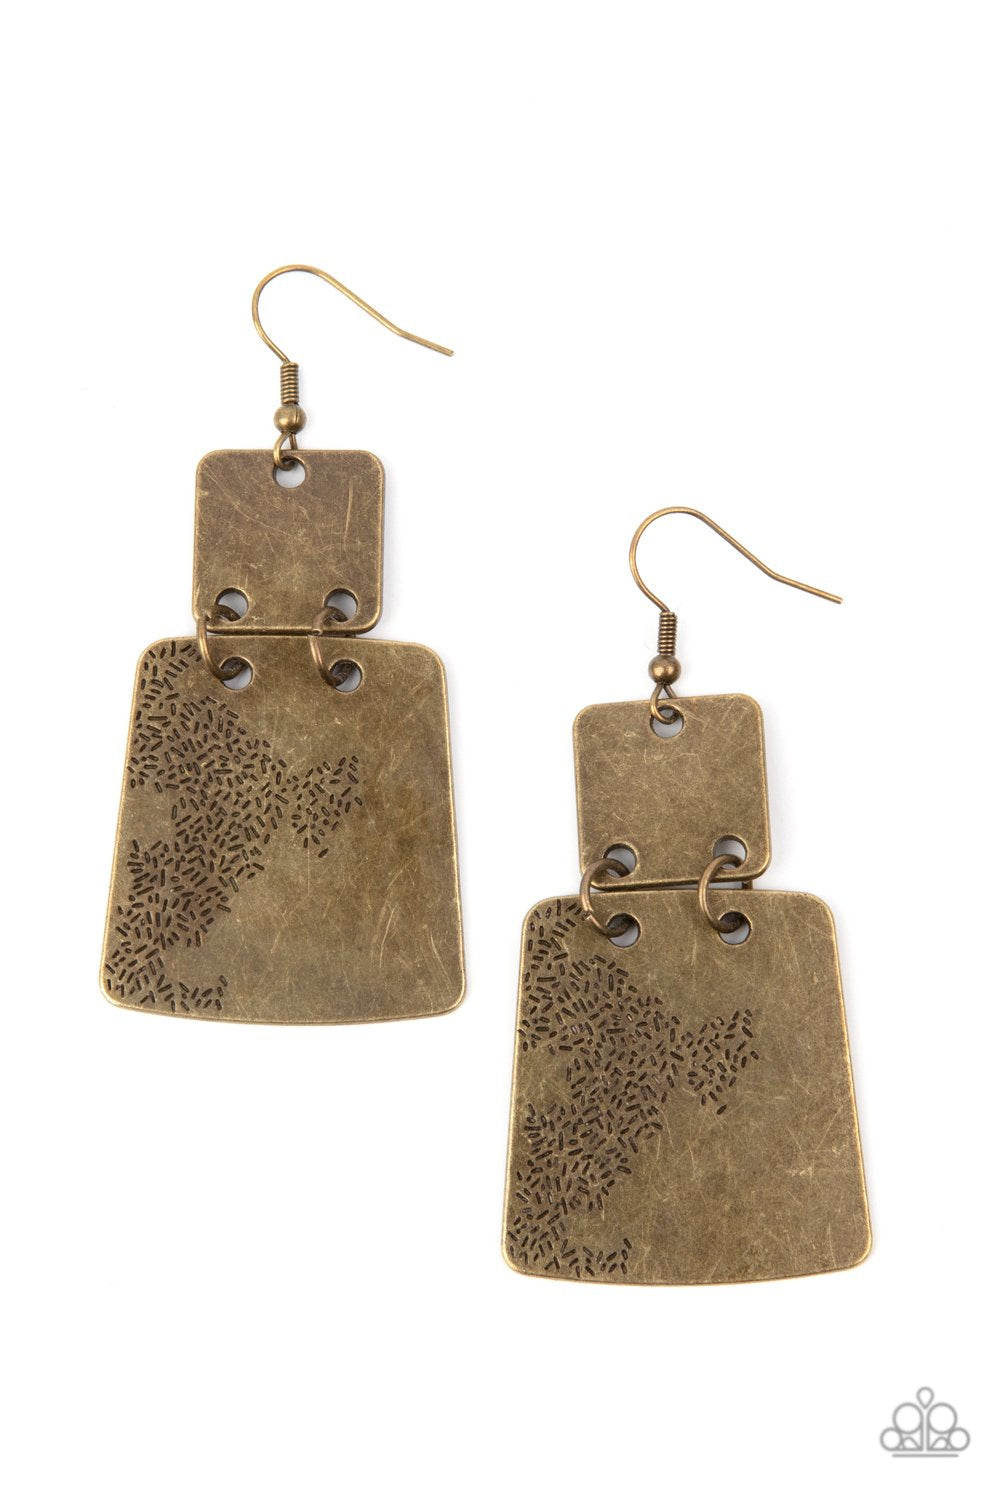 &lt;p&gt;Stamped in an abstract pattern, a flared brass plate links to the bottom of a square brass frame, creating a rustic lure. Earring attaches to a standard fishhook fitting.
 &lt;/p&gt;  

&lt;p&gt; &lt;i&gt;  Sold as one pair of earrings. &lt;/i&gt;  &lt;/p&gt;


&lt;img src=\&quot;https://d9b54x484lq62.cloudfront.net/paparazzi/shopping/images/517_tag150x115_1.png\&quot; alt=\&quot;New Kit\&quot; align=\&quot;middle\&quot; height=\&quot;50\&quot; width=\&quot;50\&quot;&gt;